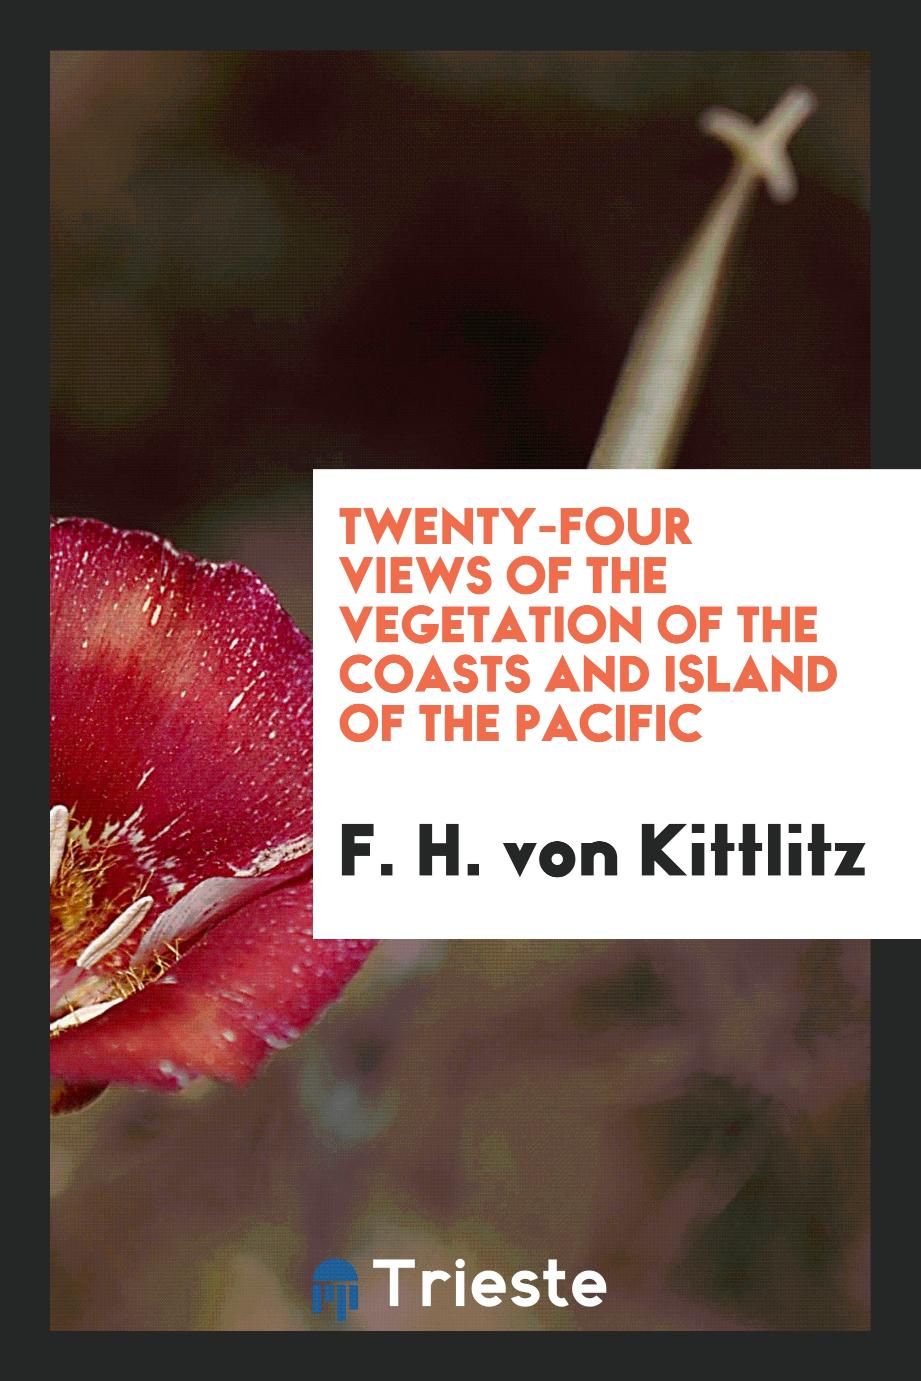 Twenty-Four Views of the Vegetation of the Coasts and Island of the Pacific